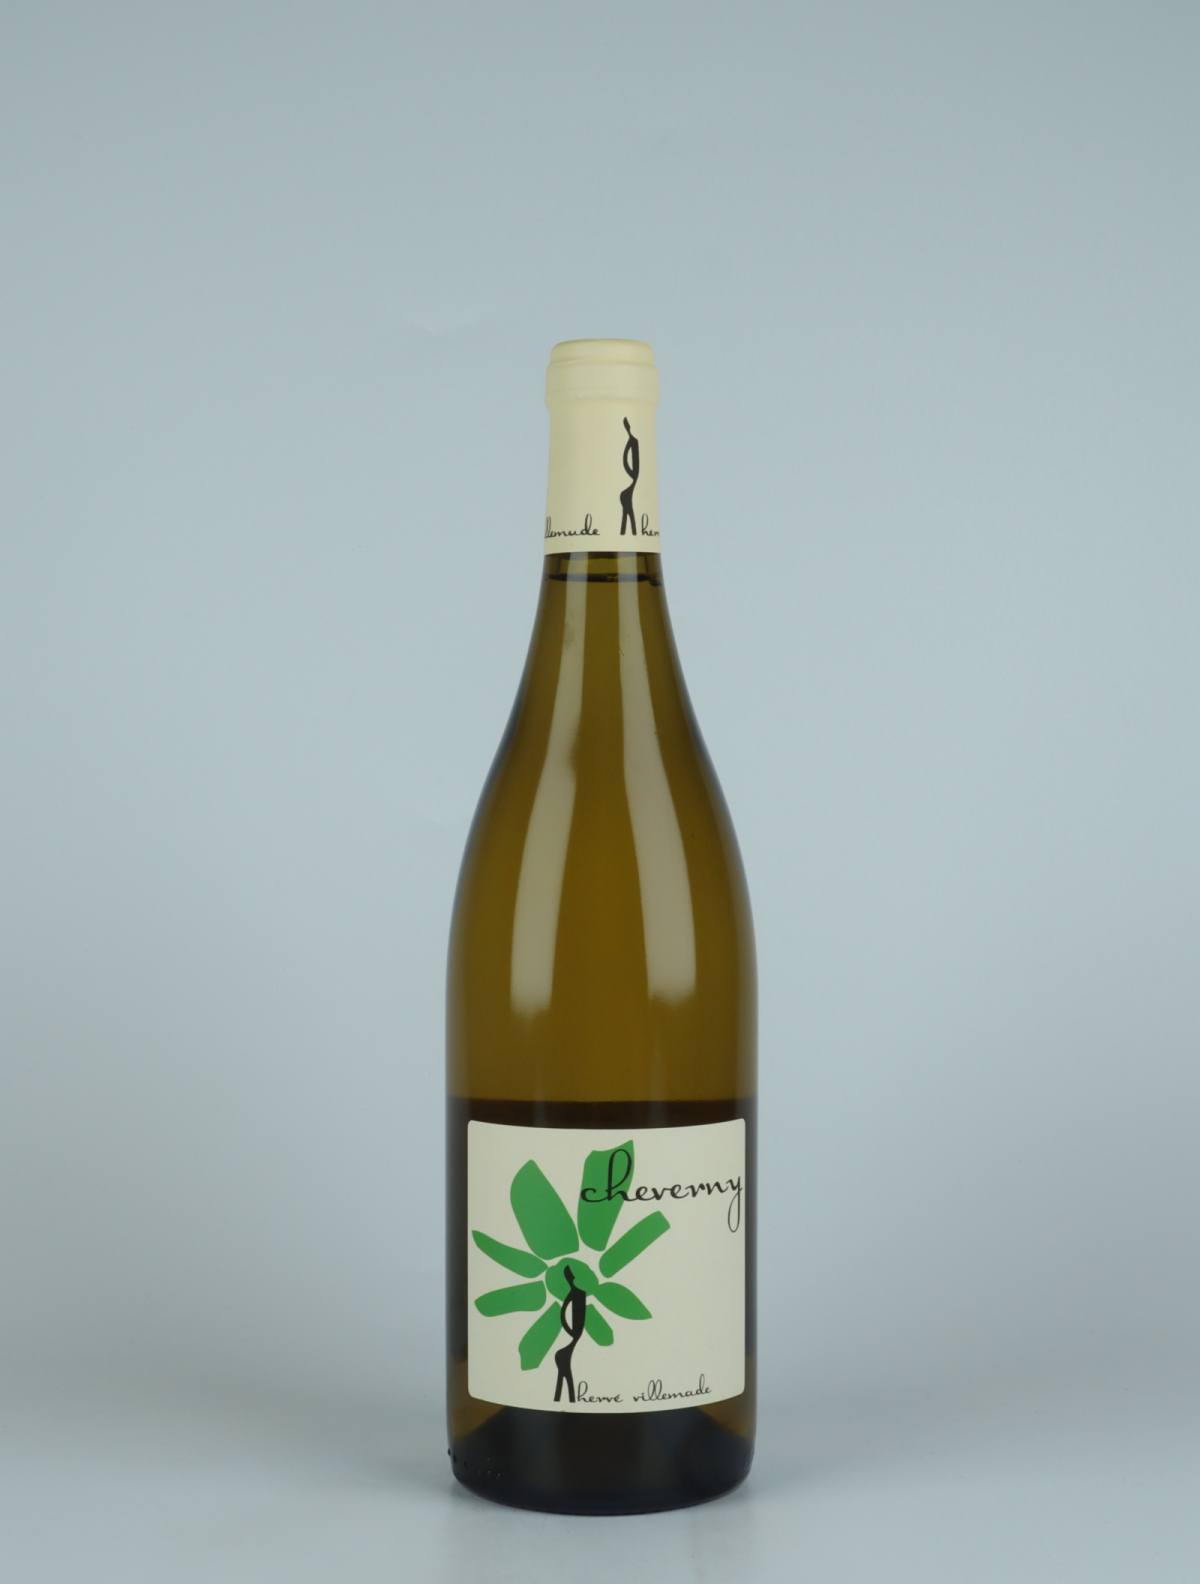 A bottle 2021 Cheverny Blanc White wine from Hervé Villemade, Loire in France